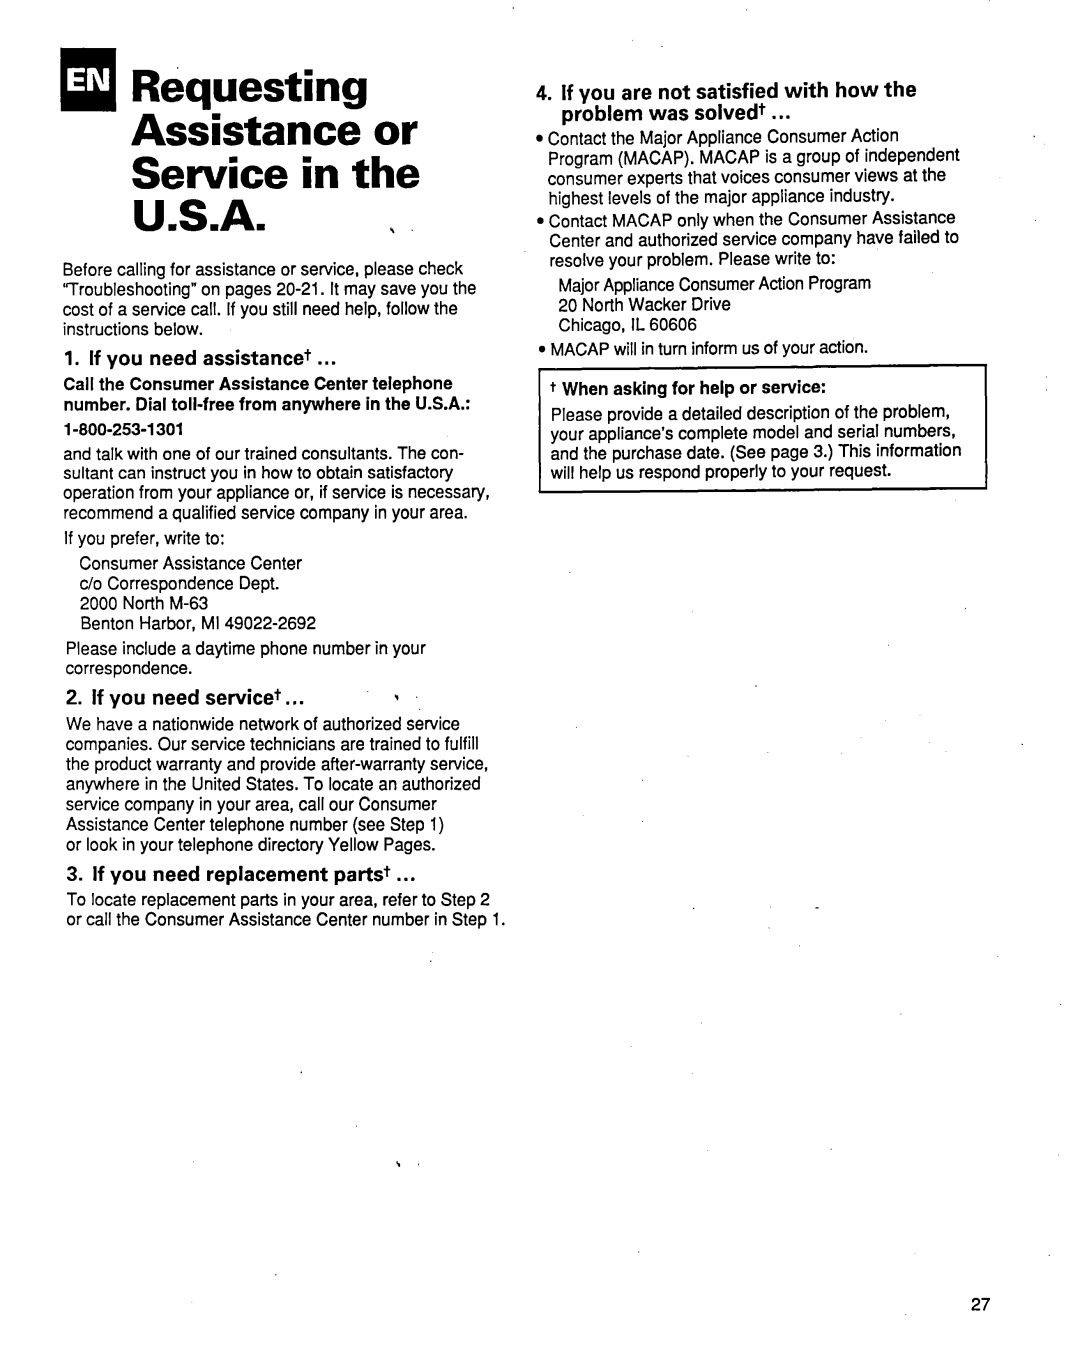 Whirlpool ACM184XE1 aIR&questing Assistance or Service in the, U.S.A. c, If you need assistance+, If you need service+ 